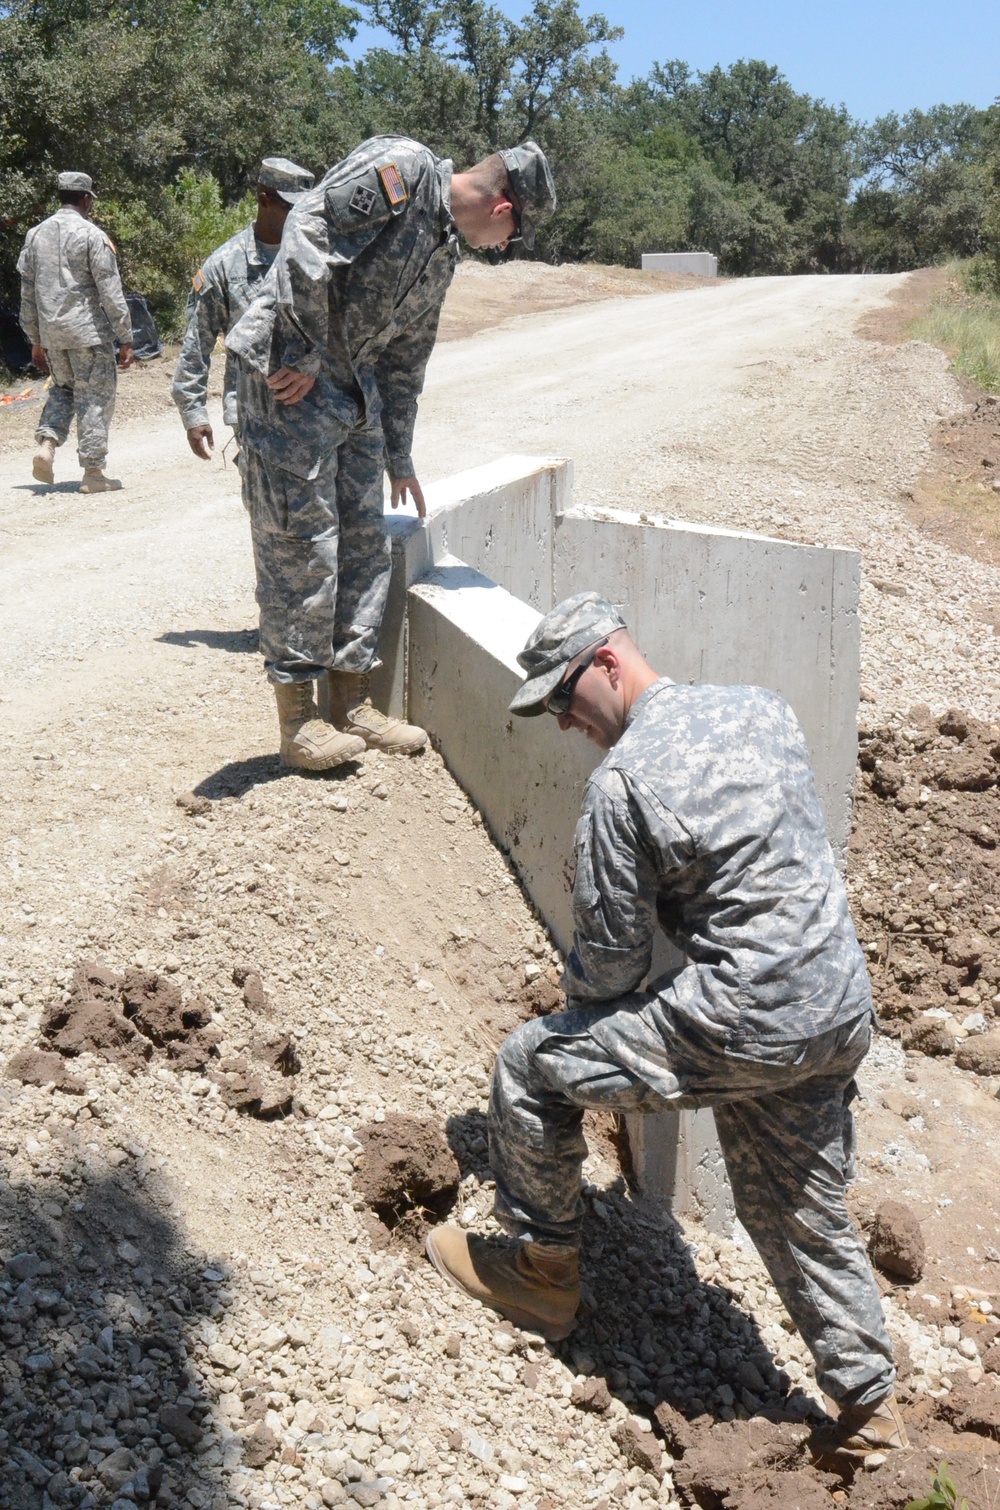 68th Engineer Company builds, repairs roads in Texas